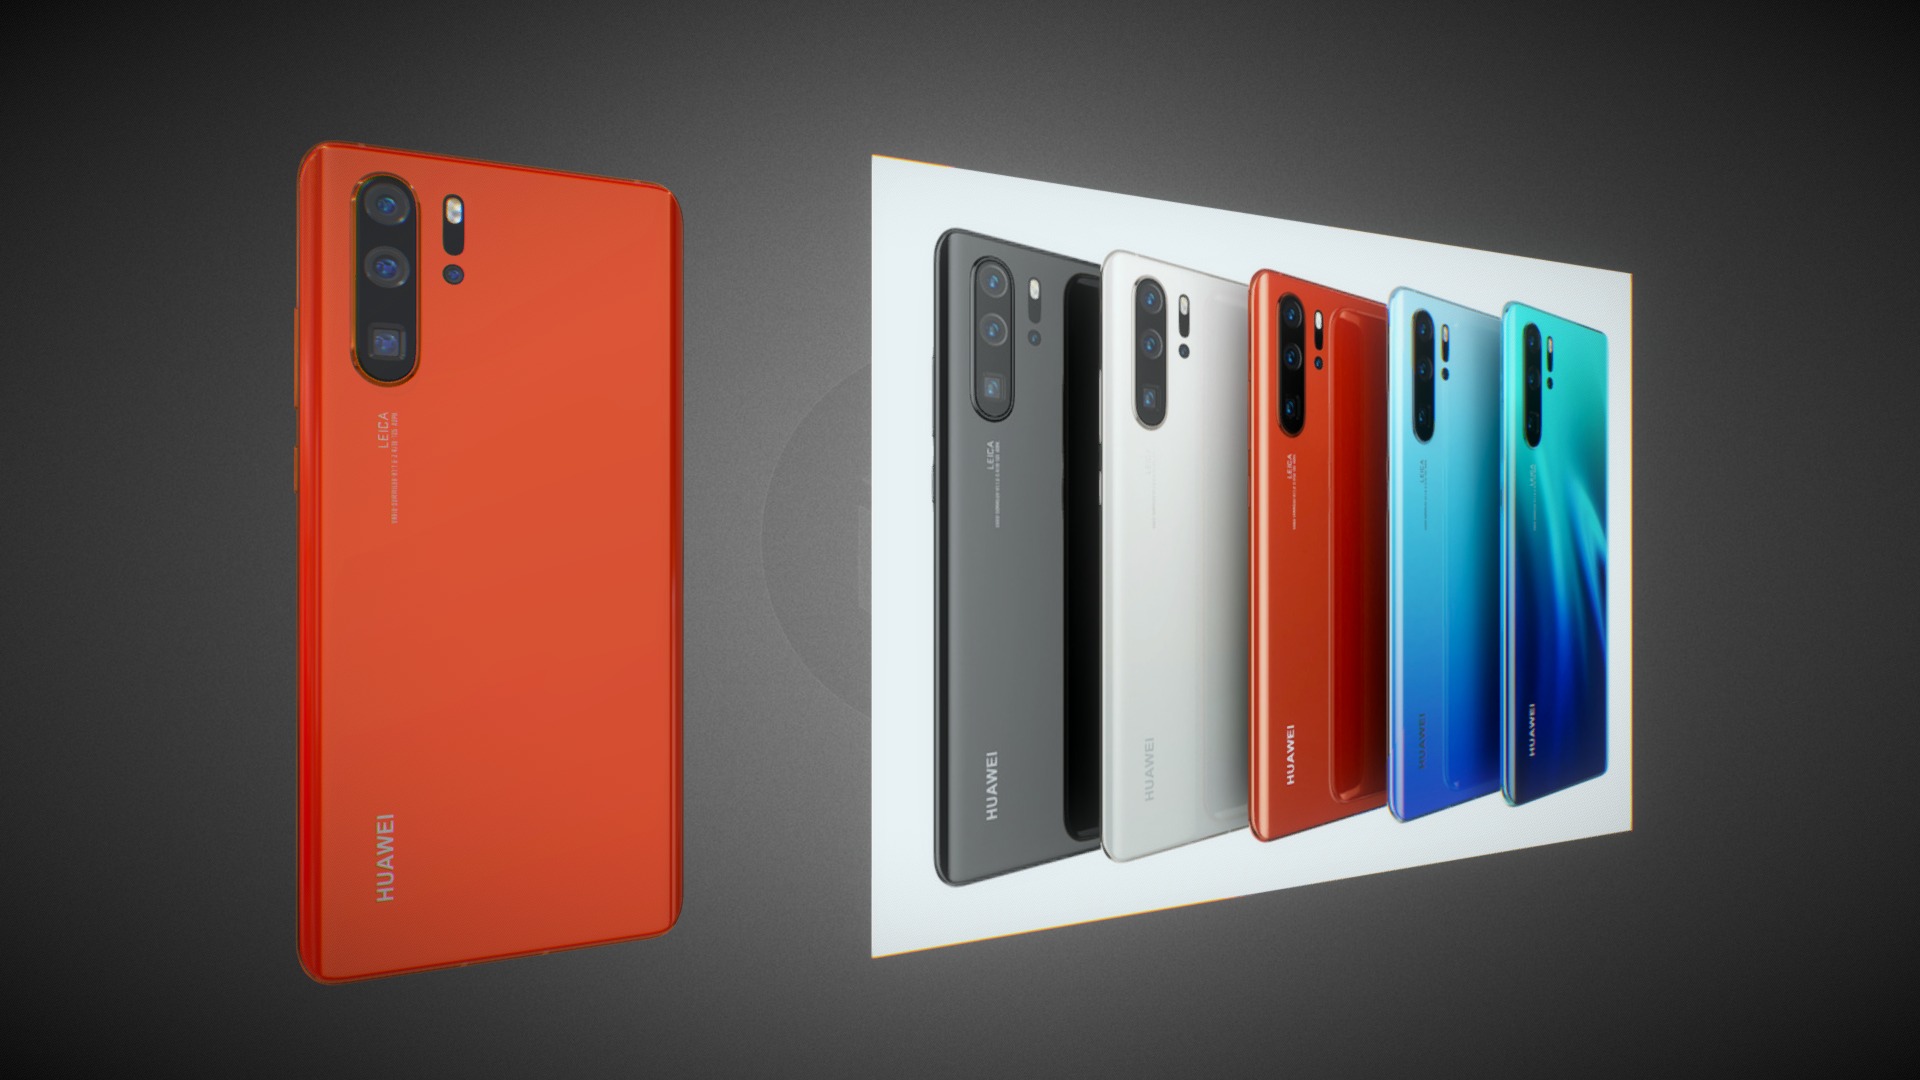 Huawei P30 Pro All colors.

This set:
3D element v2.2
The model given is easy to use
- 1 file obj standard
- 5 file 3ds Max 2013 vray material 
- 5 file 3ds Max 2013 corona material
- 1 file of 3Ds
- 5 file e3d full set of materials.
- 5 file cinema 4d standard.

Topology of geometry:
- forms and proportions of The 3D model
- the geometry of the model was created very neatly
- there are no many-sided polygons
- detailed enough for close-up renders
- the model optimized for turbosmooth modifier
- Not collapsed the turbosmooth modified
- apply the Smooth modifier with a parameter to get the desired level of detail

Materials and Textures:
- 3ds max files included Vray-Shaders
- 3ds max files included Corona-Shaders
- file e3d full set of materials
- all texture paths are cleared

Organization of scene:
- to all objects and materials
- real world size (system units - mm)
- coordinates of location of the model in space (x0, y0, z0)
- does not contain extraneous or hidden objects (lights, cameras, shapes etc.) - Huawei P30 Pro ALL Colors - Buy Royalty Free 3D model by madMIX 3d model